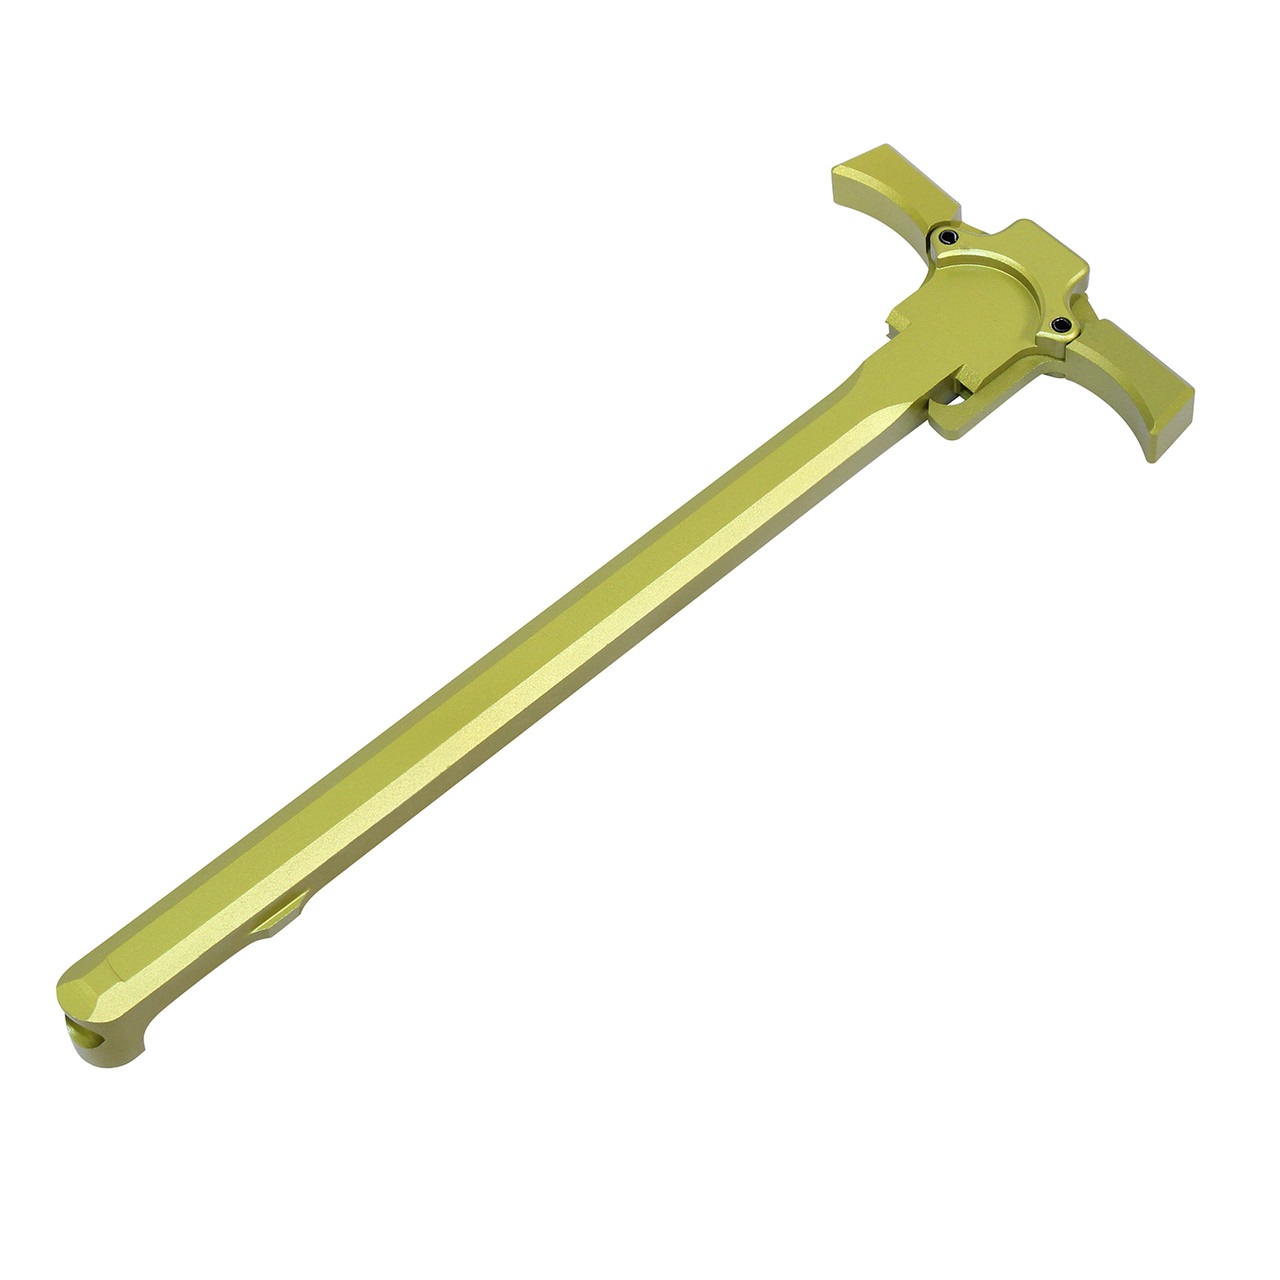 Guntec USA CHARGE-QE-NY AR-15 Ambidextrous "Quick Engage" Charging Handle (Anodized Neon Yellow)